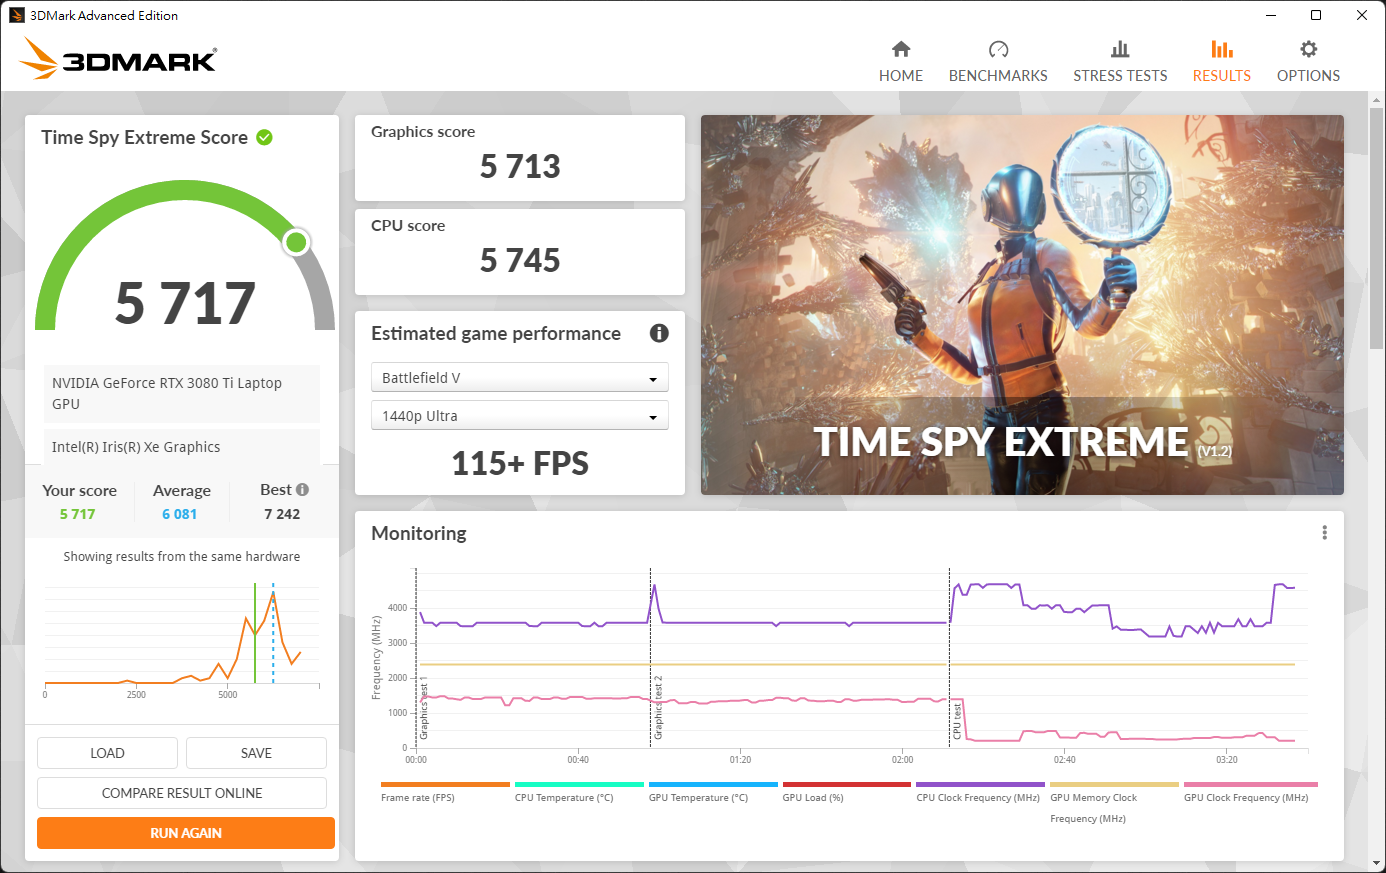 3dmark_timespy_extreme.png